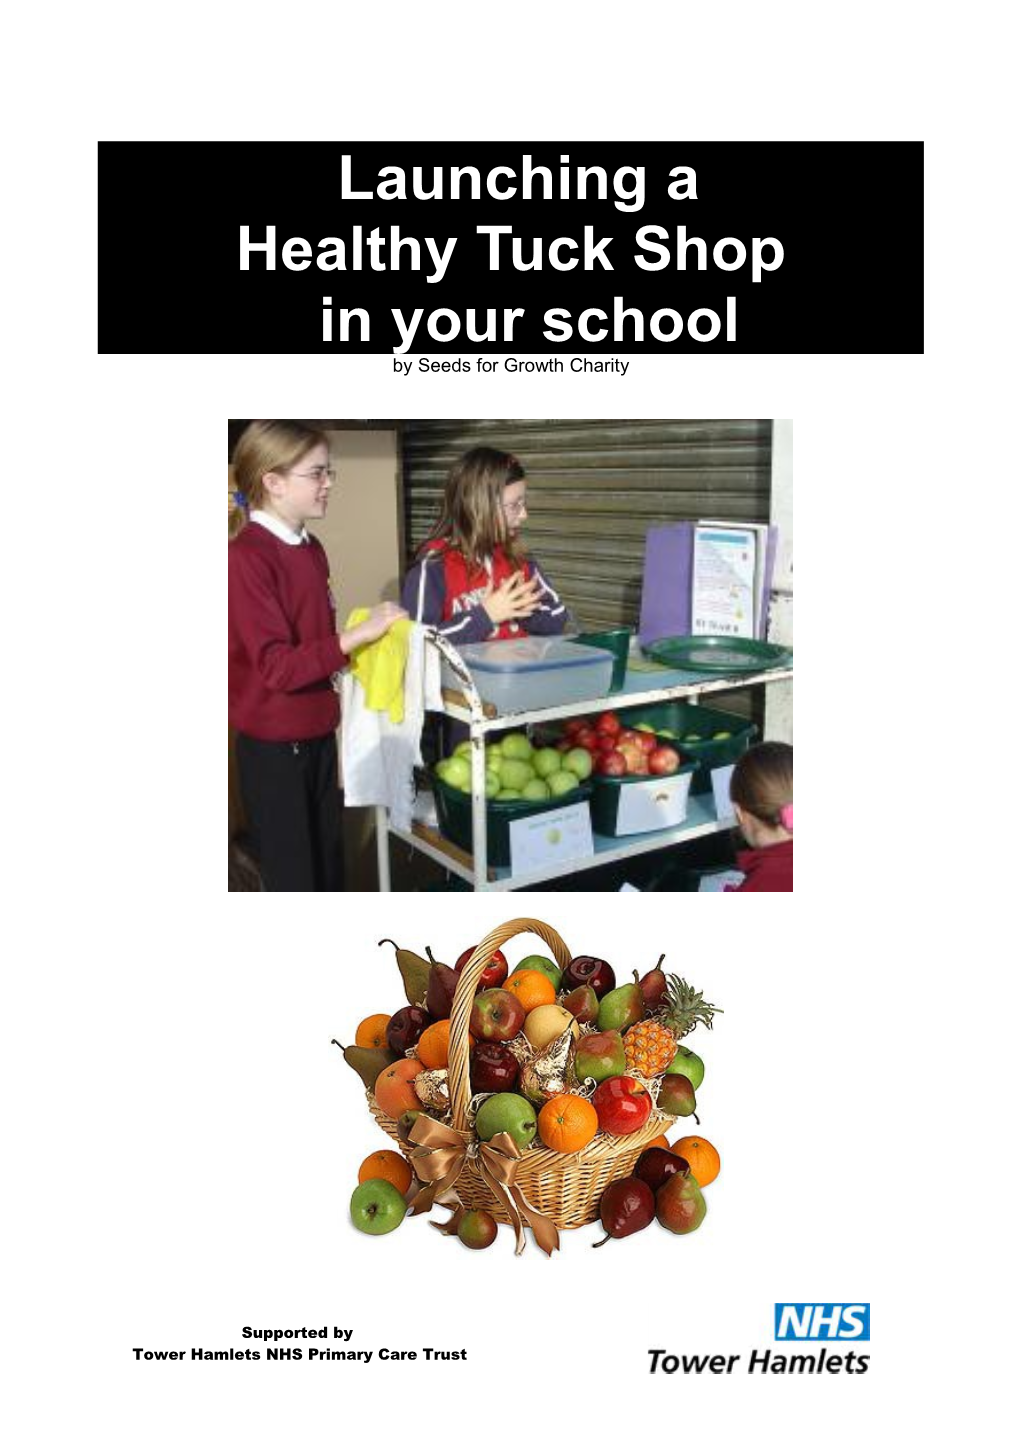 Launching a Healthy Tuck Shop in Your School